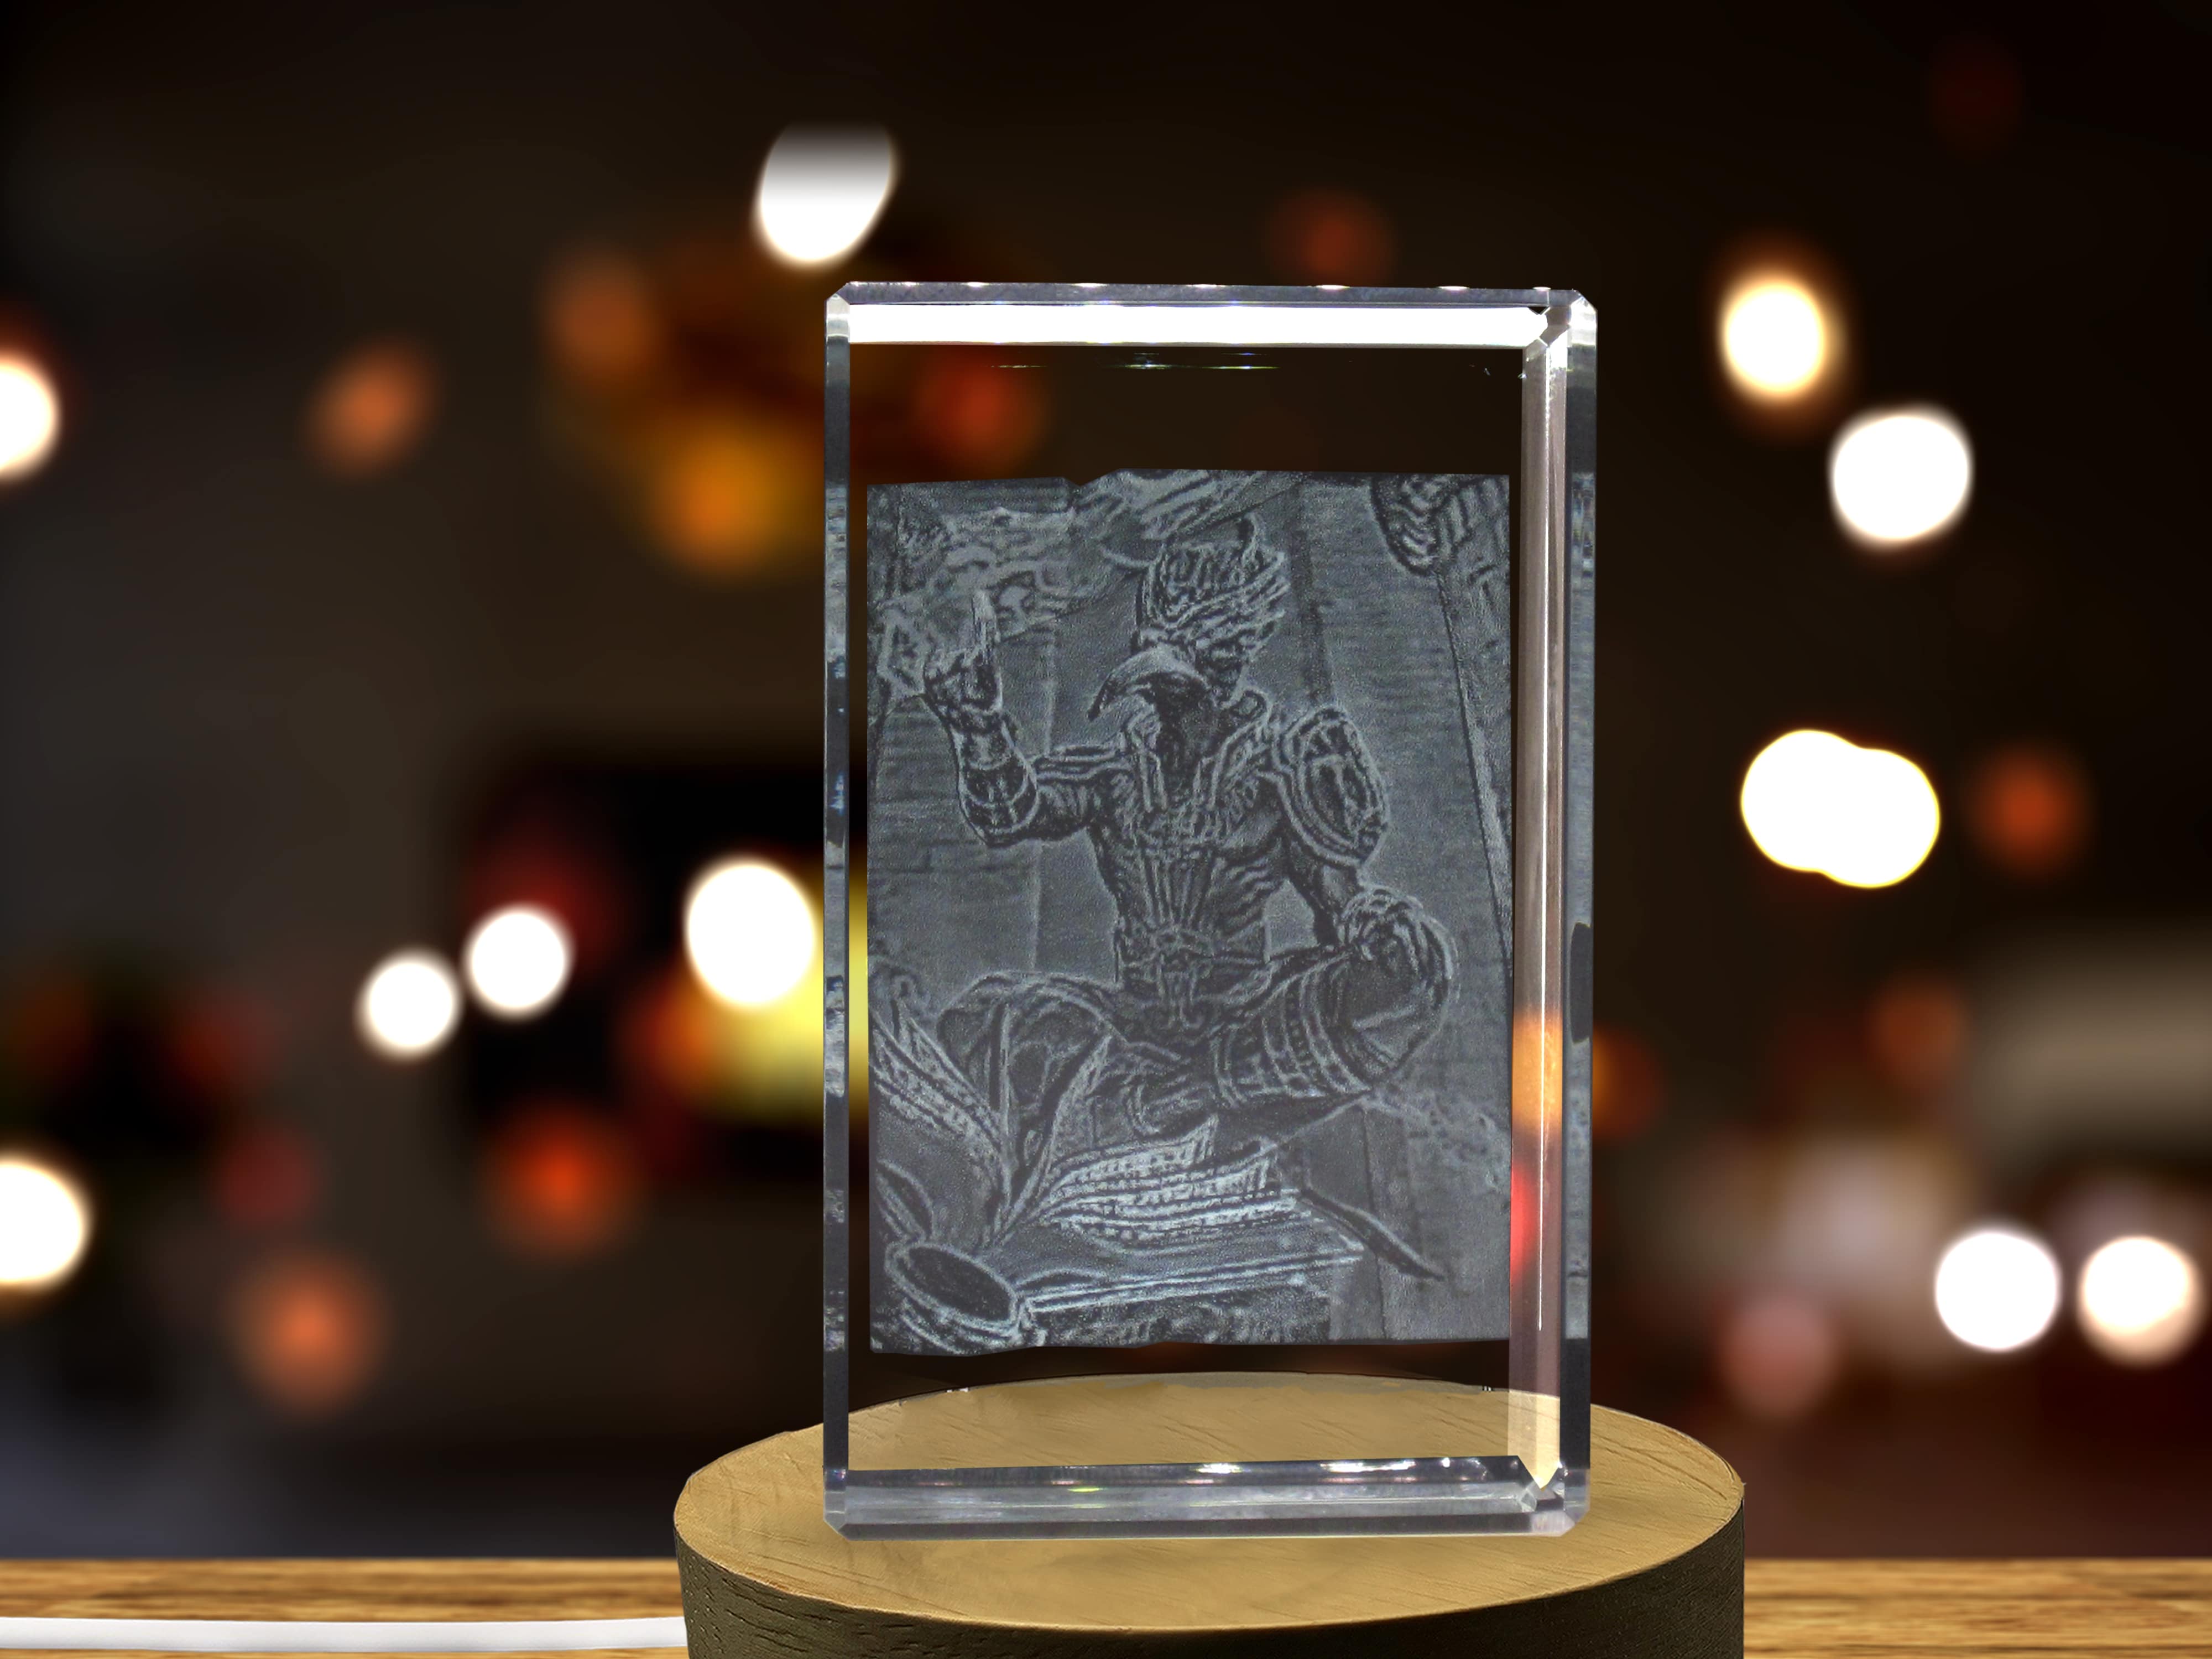 Thoth 3D Engraved Crystal 3D Engraved Crystal Keepsake/Gift/Decor/Collectible/Souvenir A&B Crystal Collection